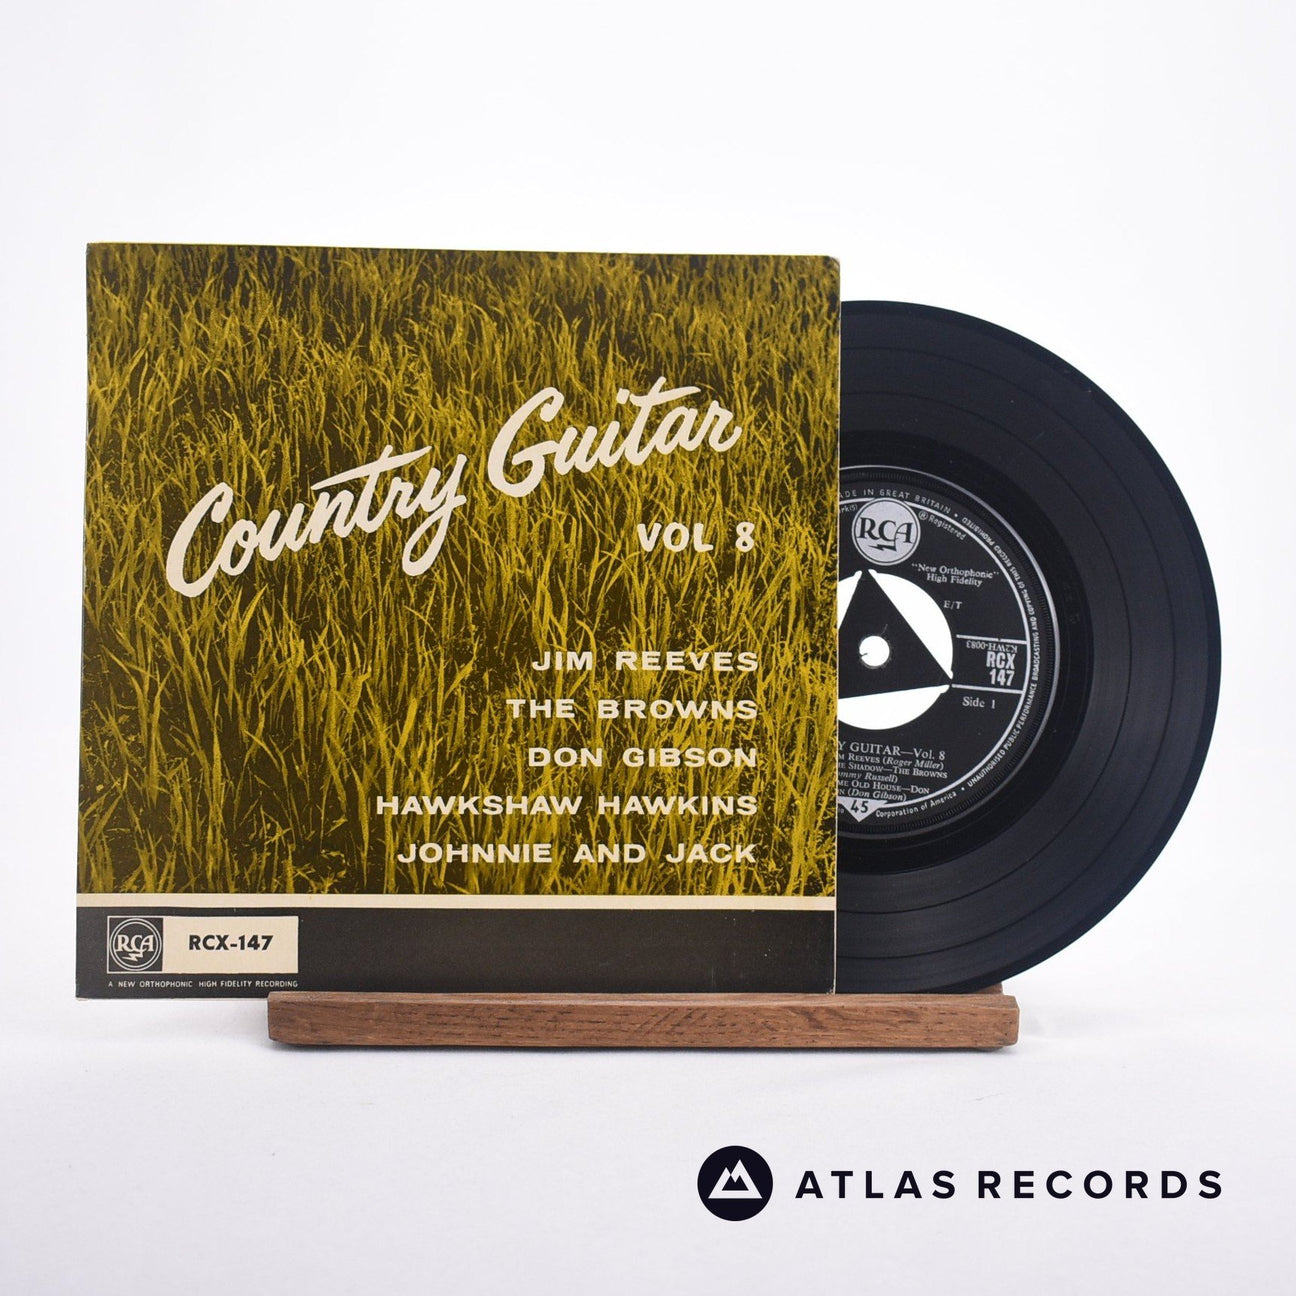 Various Country Guitar Vol. 8 7" Vinyl Record - Front Cover & Record